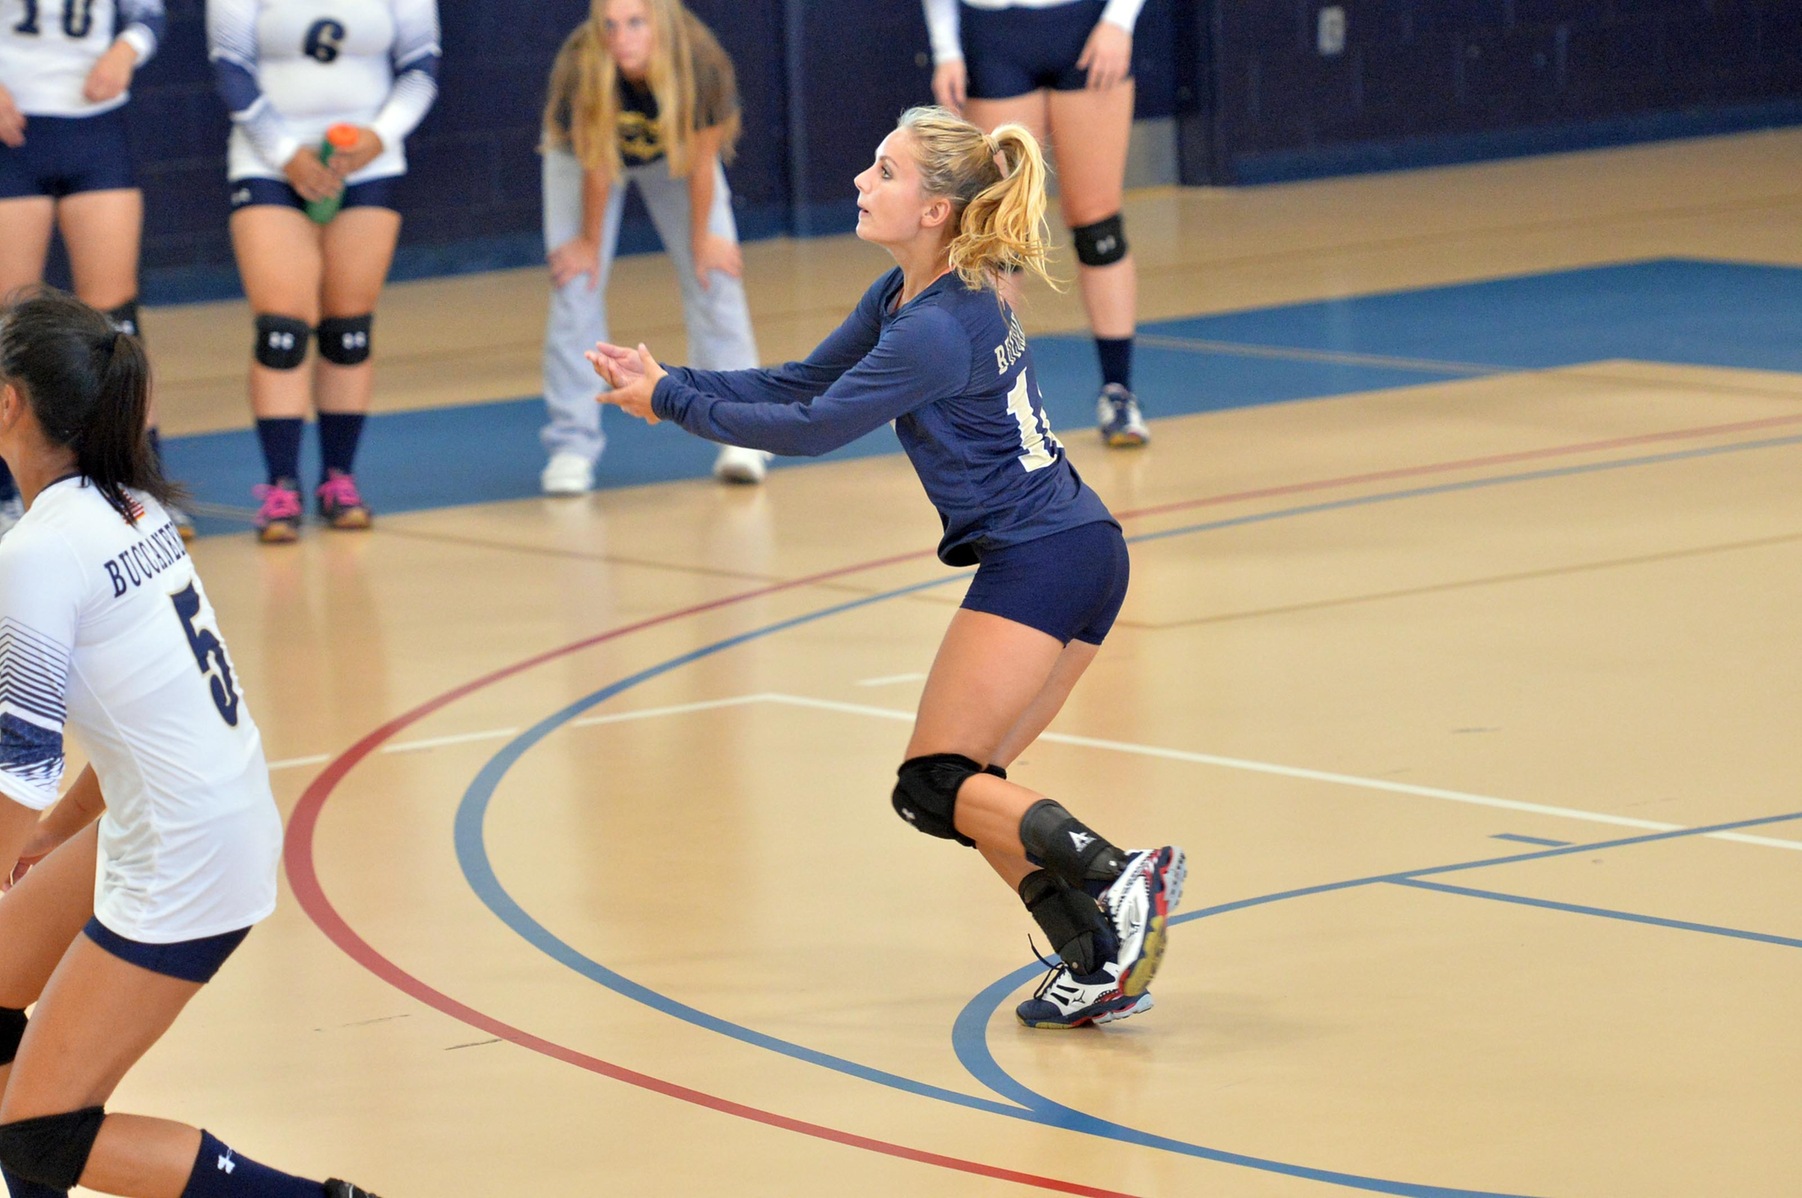 Volleyball Splits Season Opening Tri-Match with Anna Maria and Becker